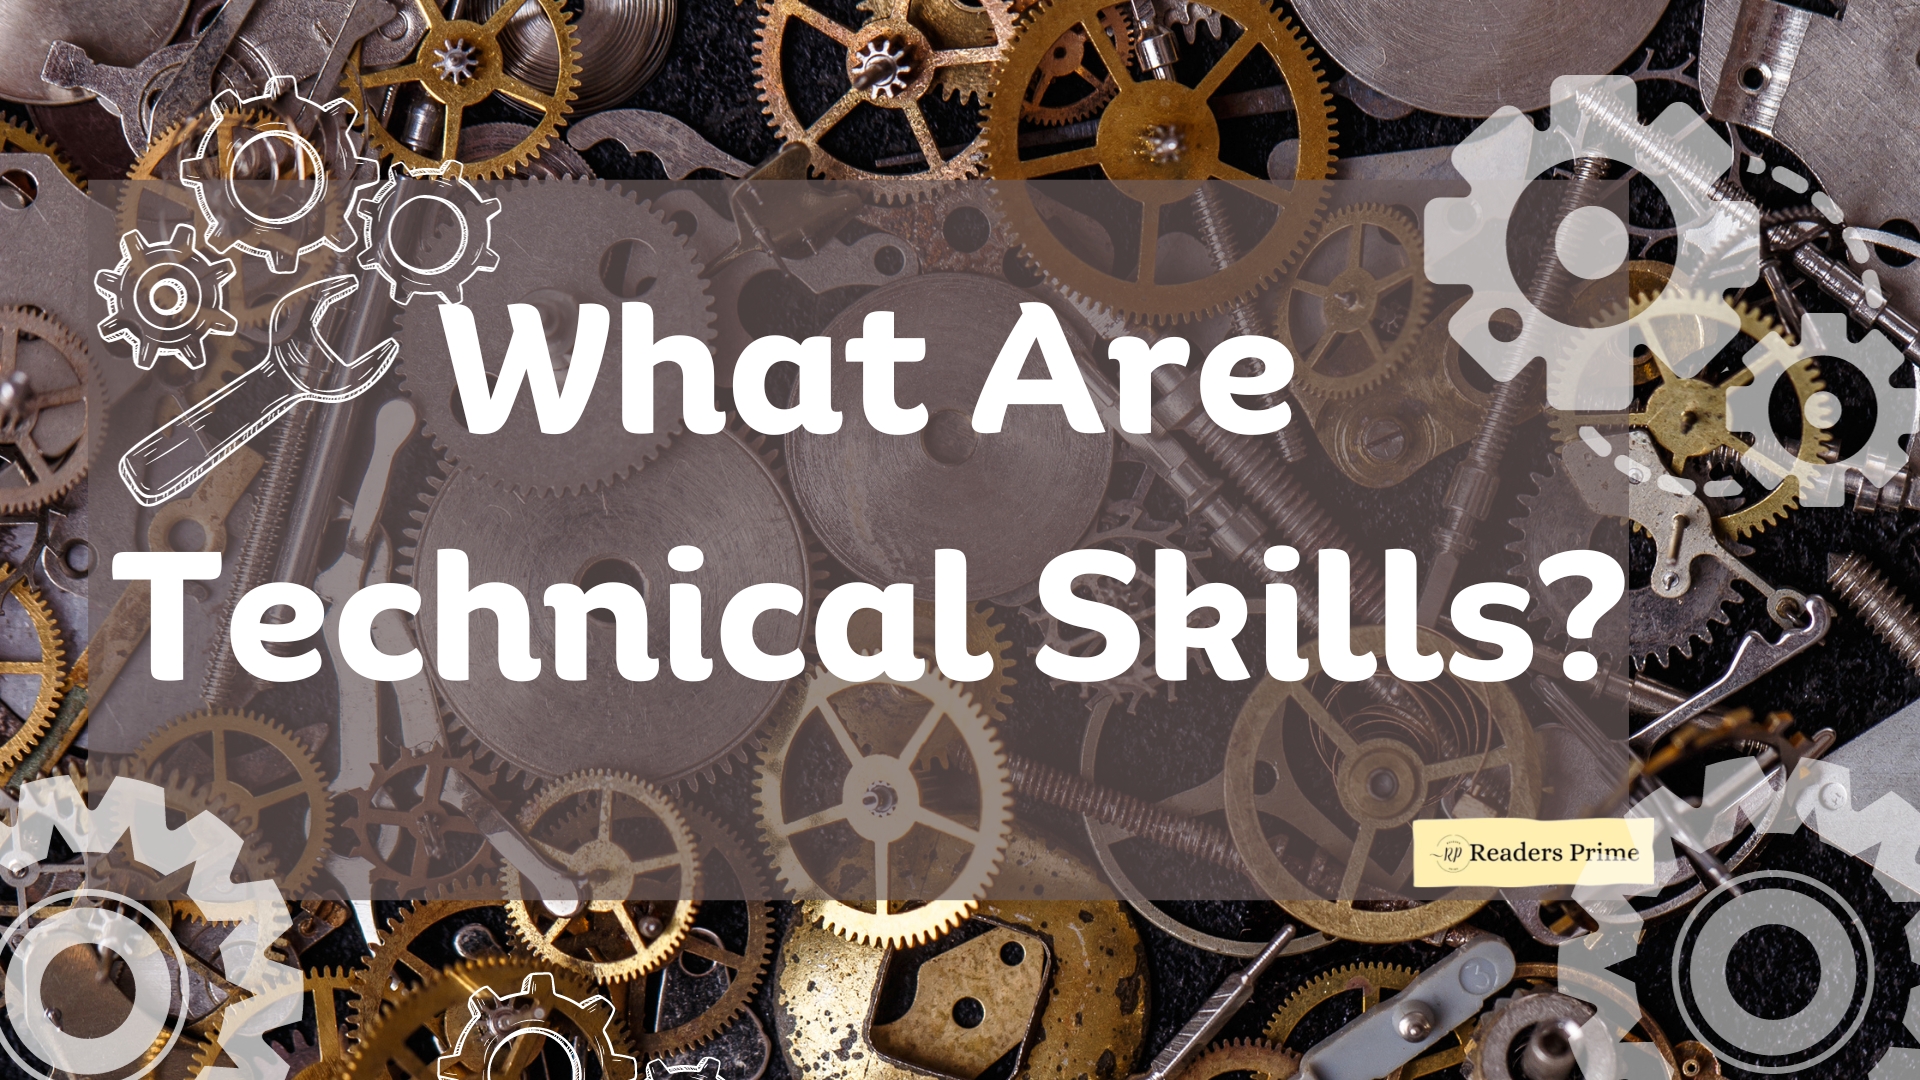 What Are Technical Skills? Learning Guide For Technical Skills To Be Added To Resume